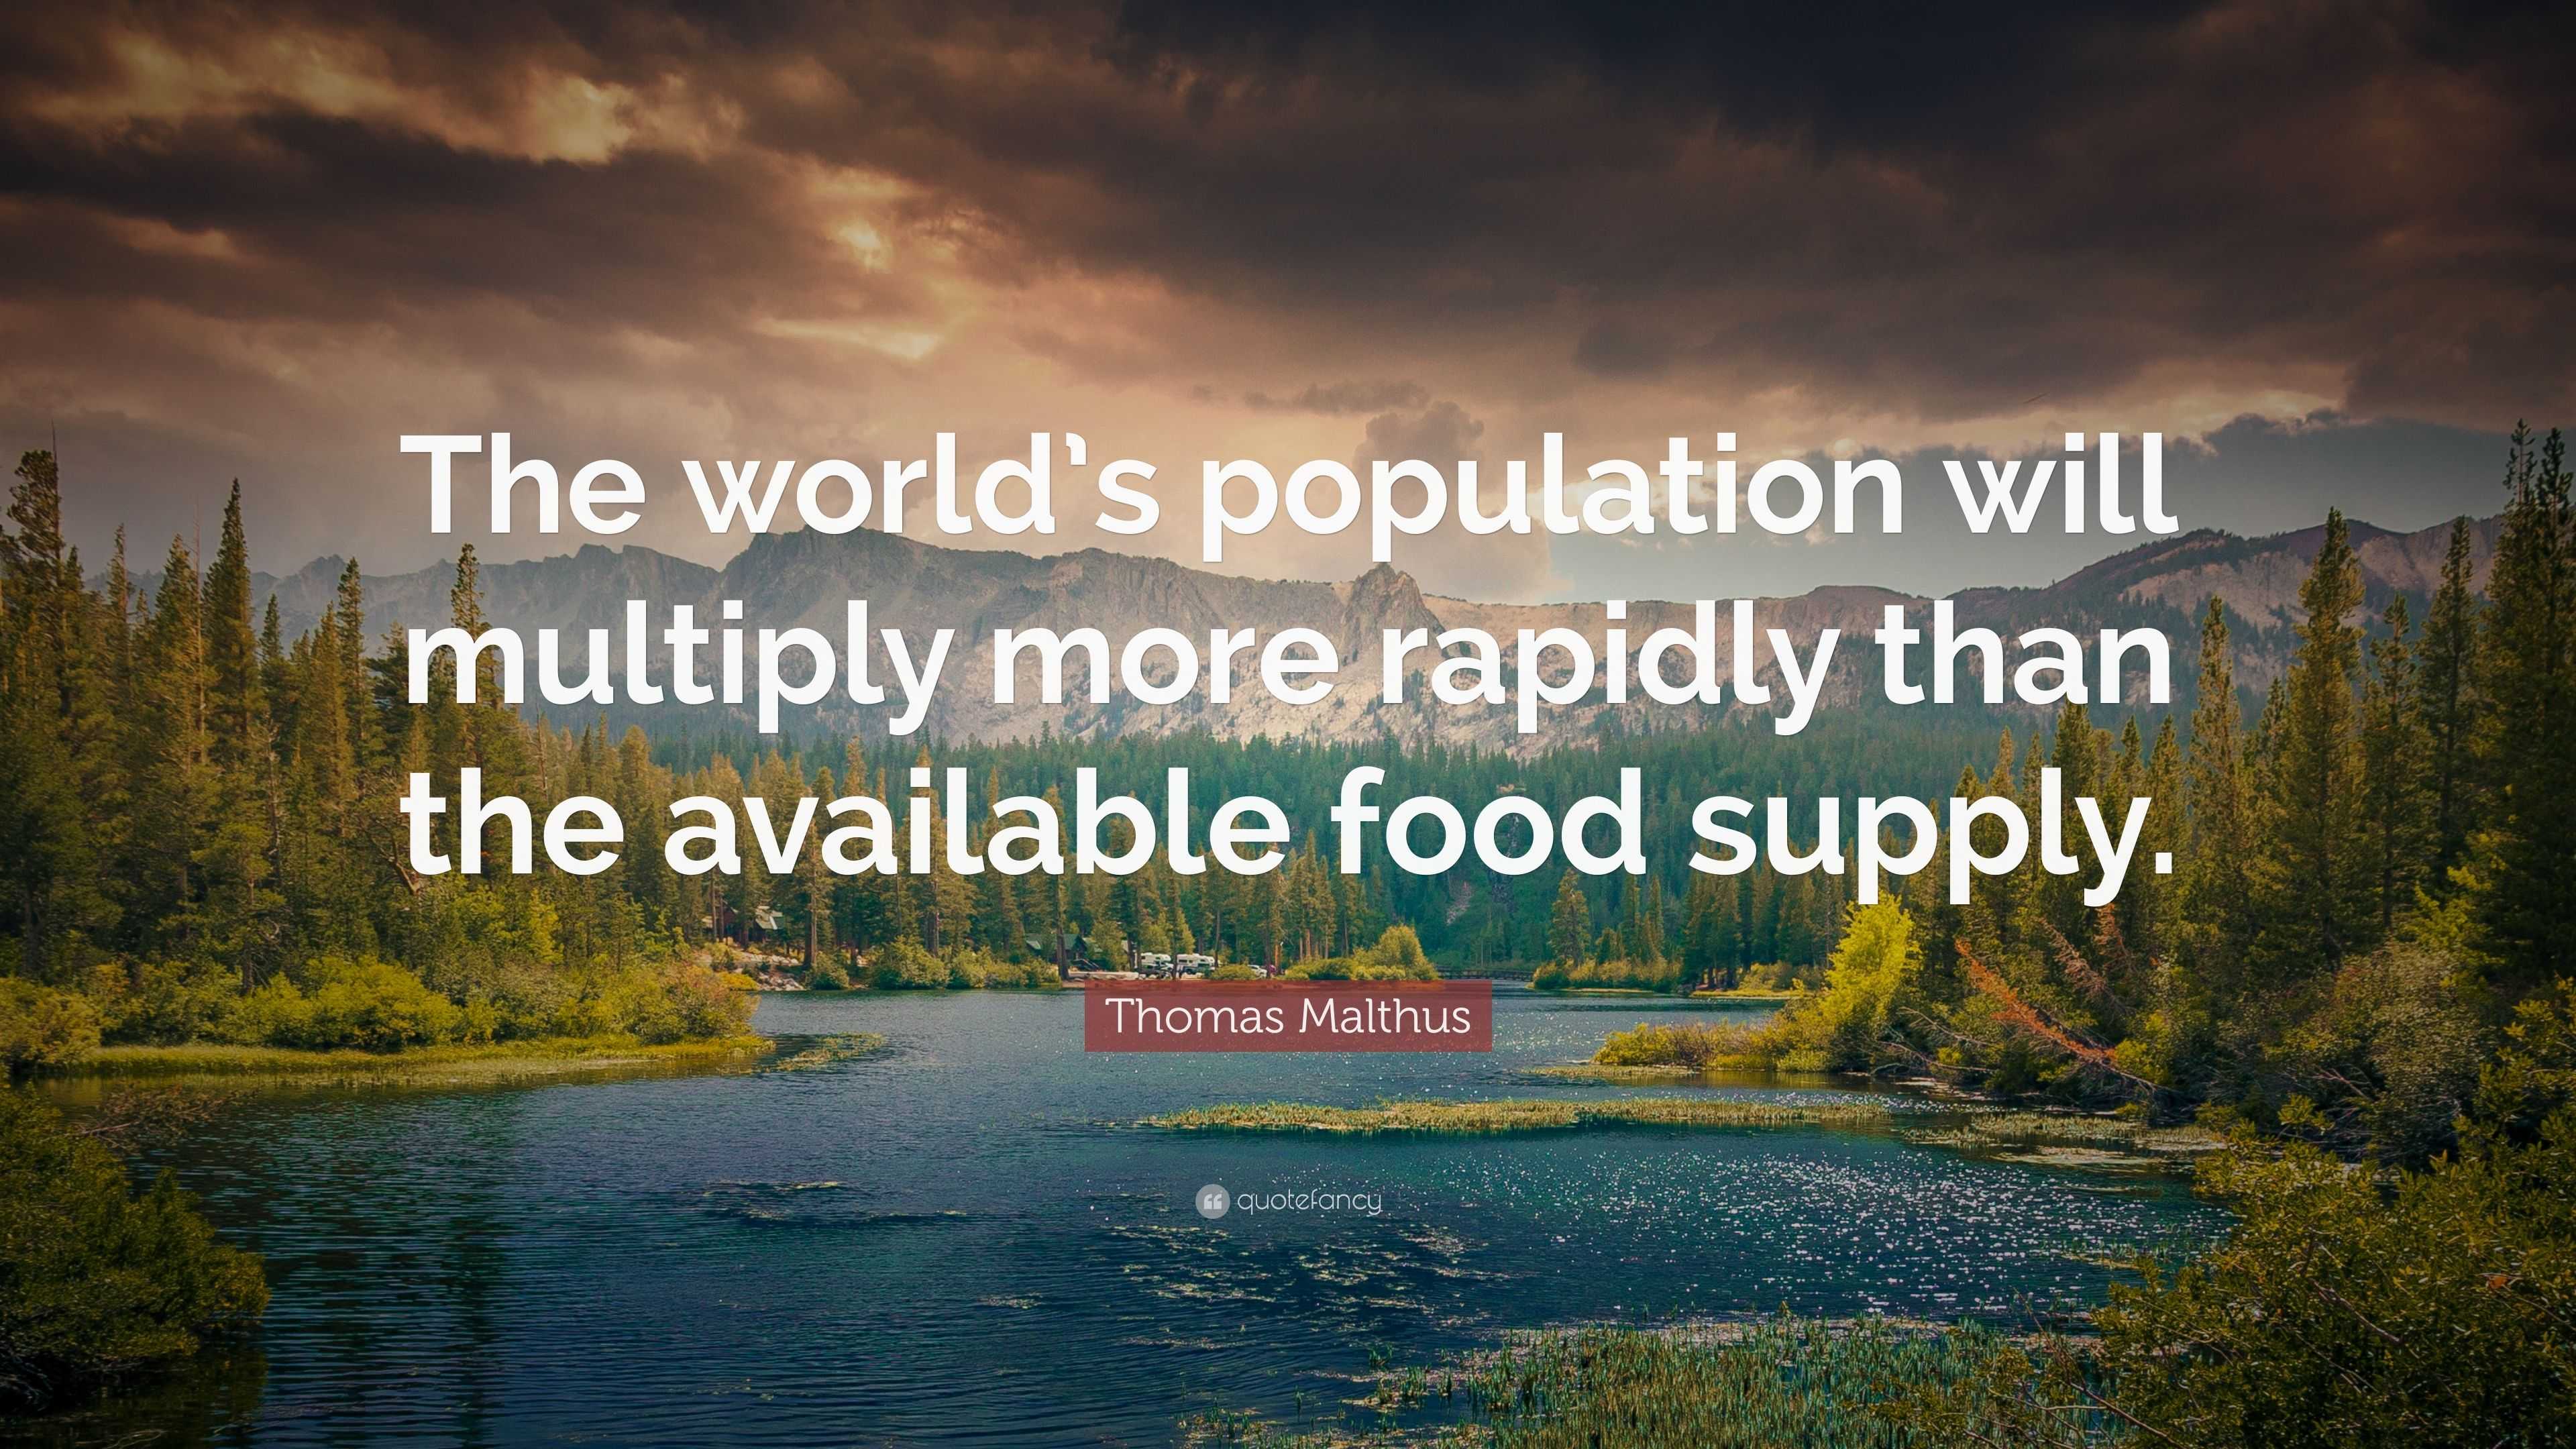 Thomas Malthus Quote: “The world’s population will multiply more